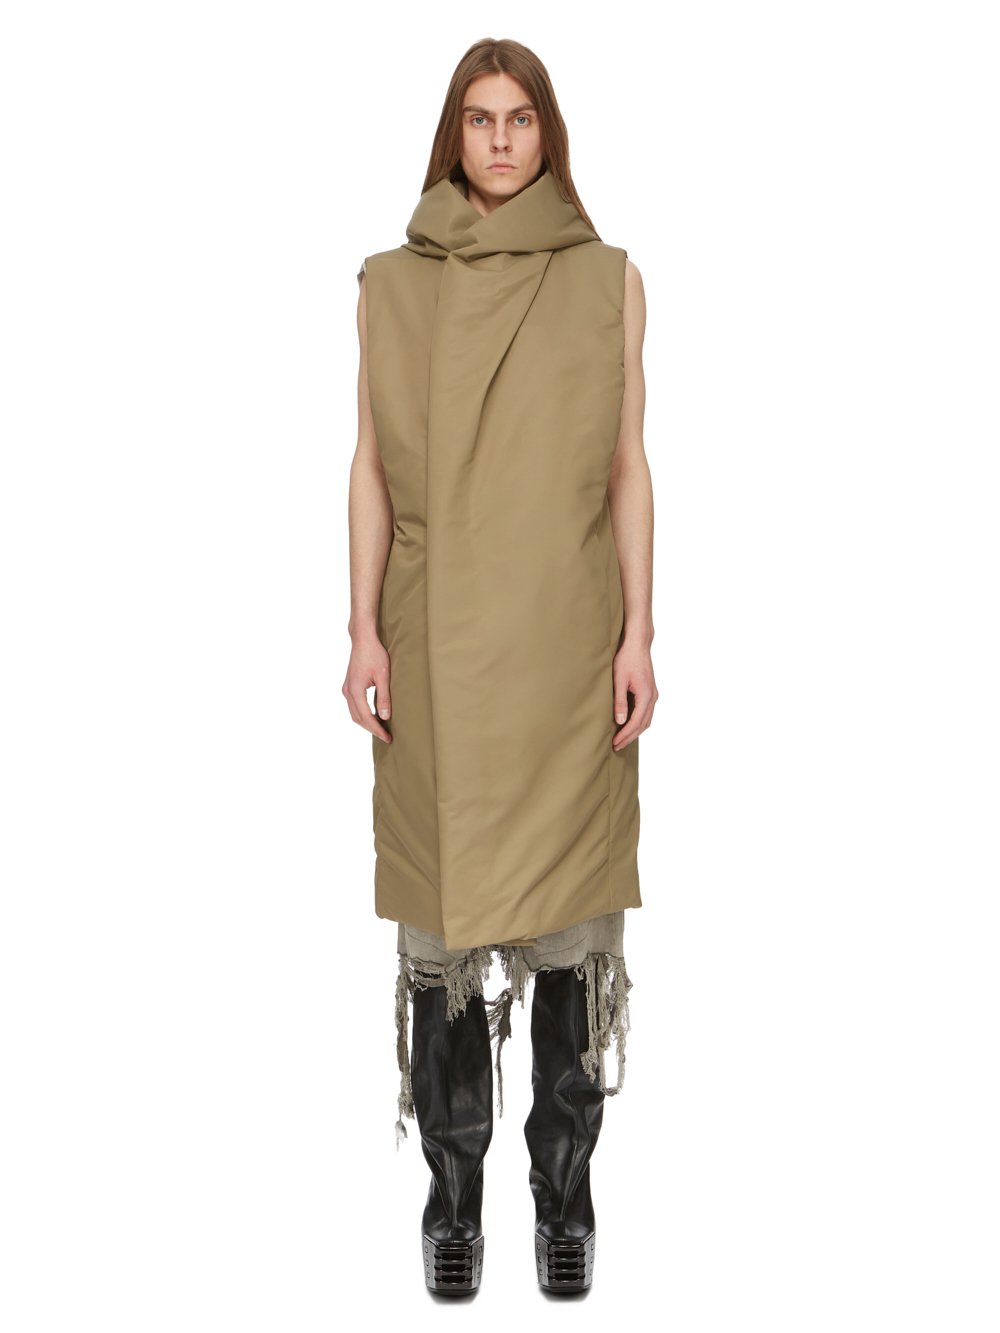 RICK OWENS FW23 LUXOR RUNWAY HOODED LINER IN PALE GREEN RECYCLED BOMBER